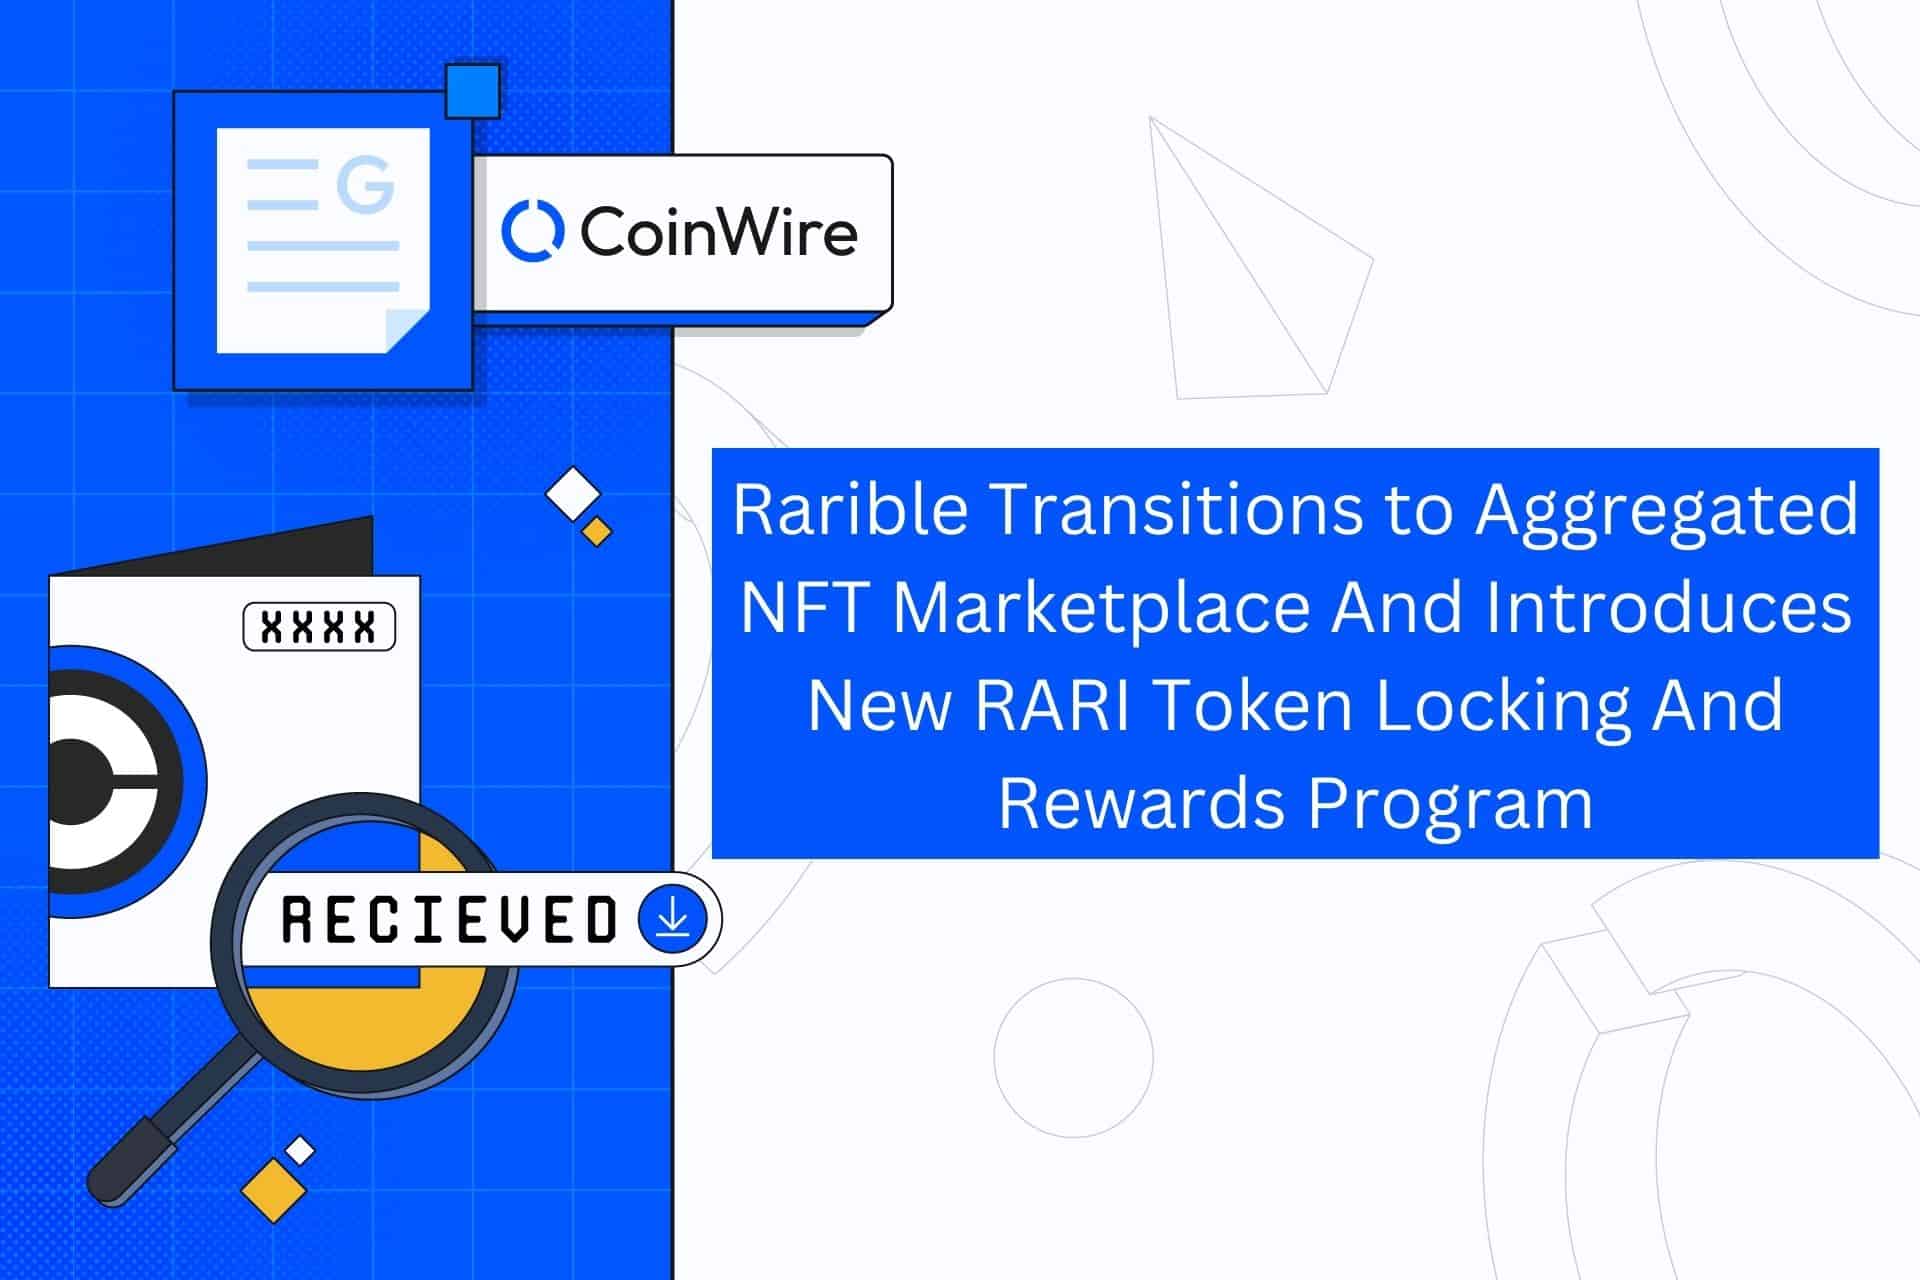 Rarible Transitions To Aggregated Nft Marketplace And Introduces New Rari Token Locking And Rewards Program